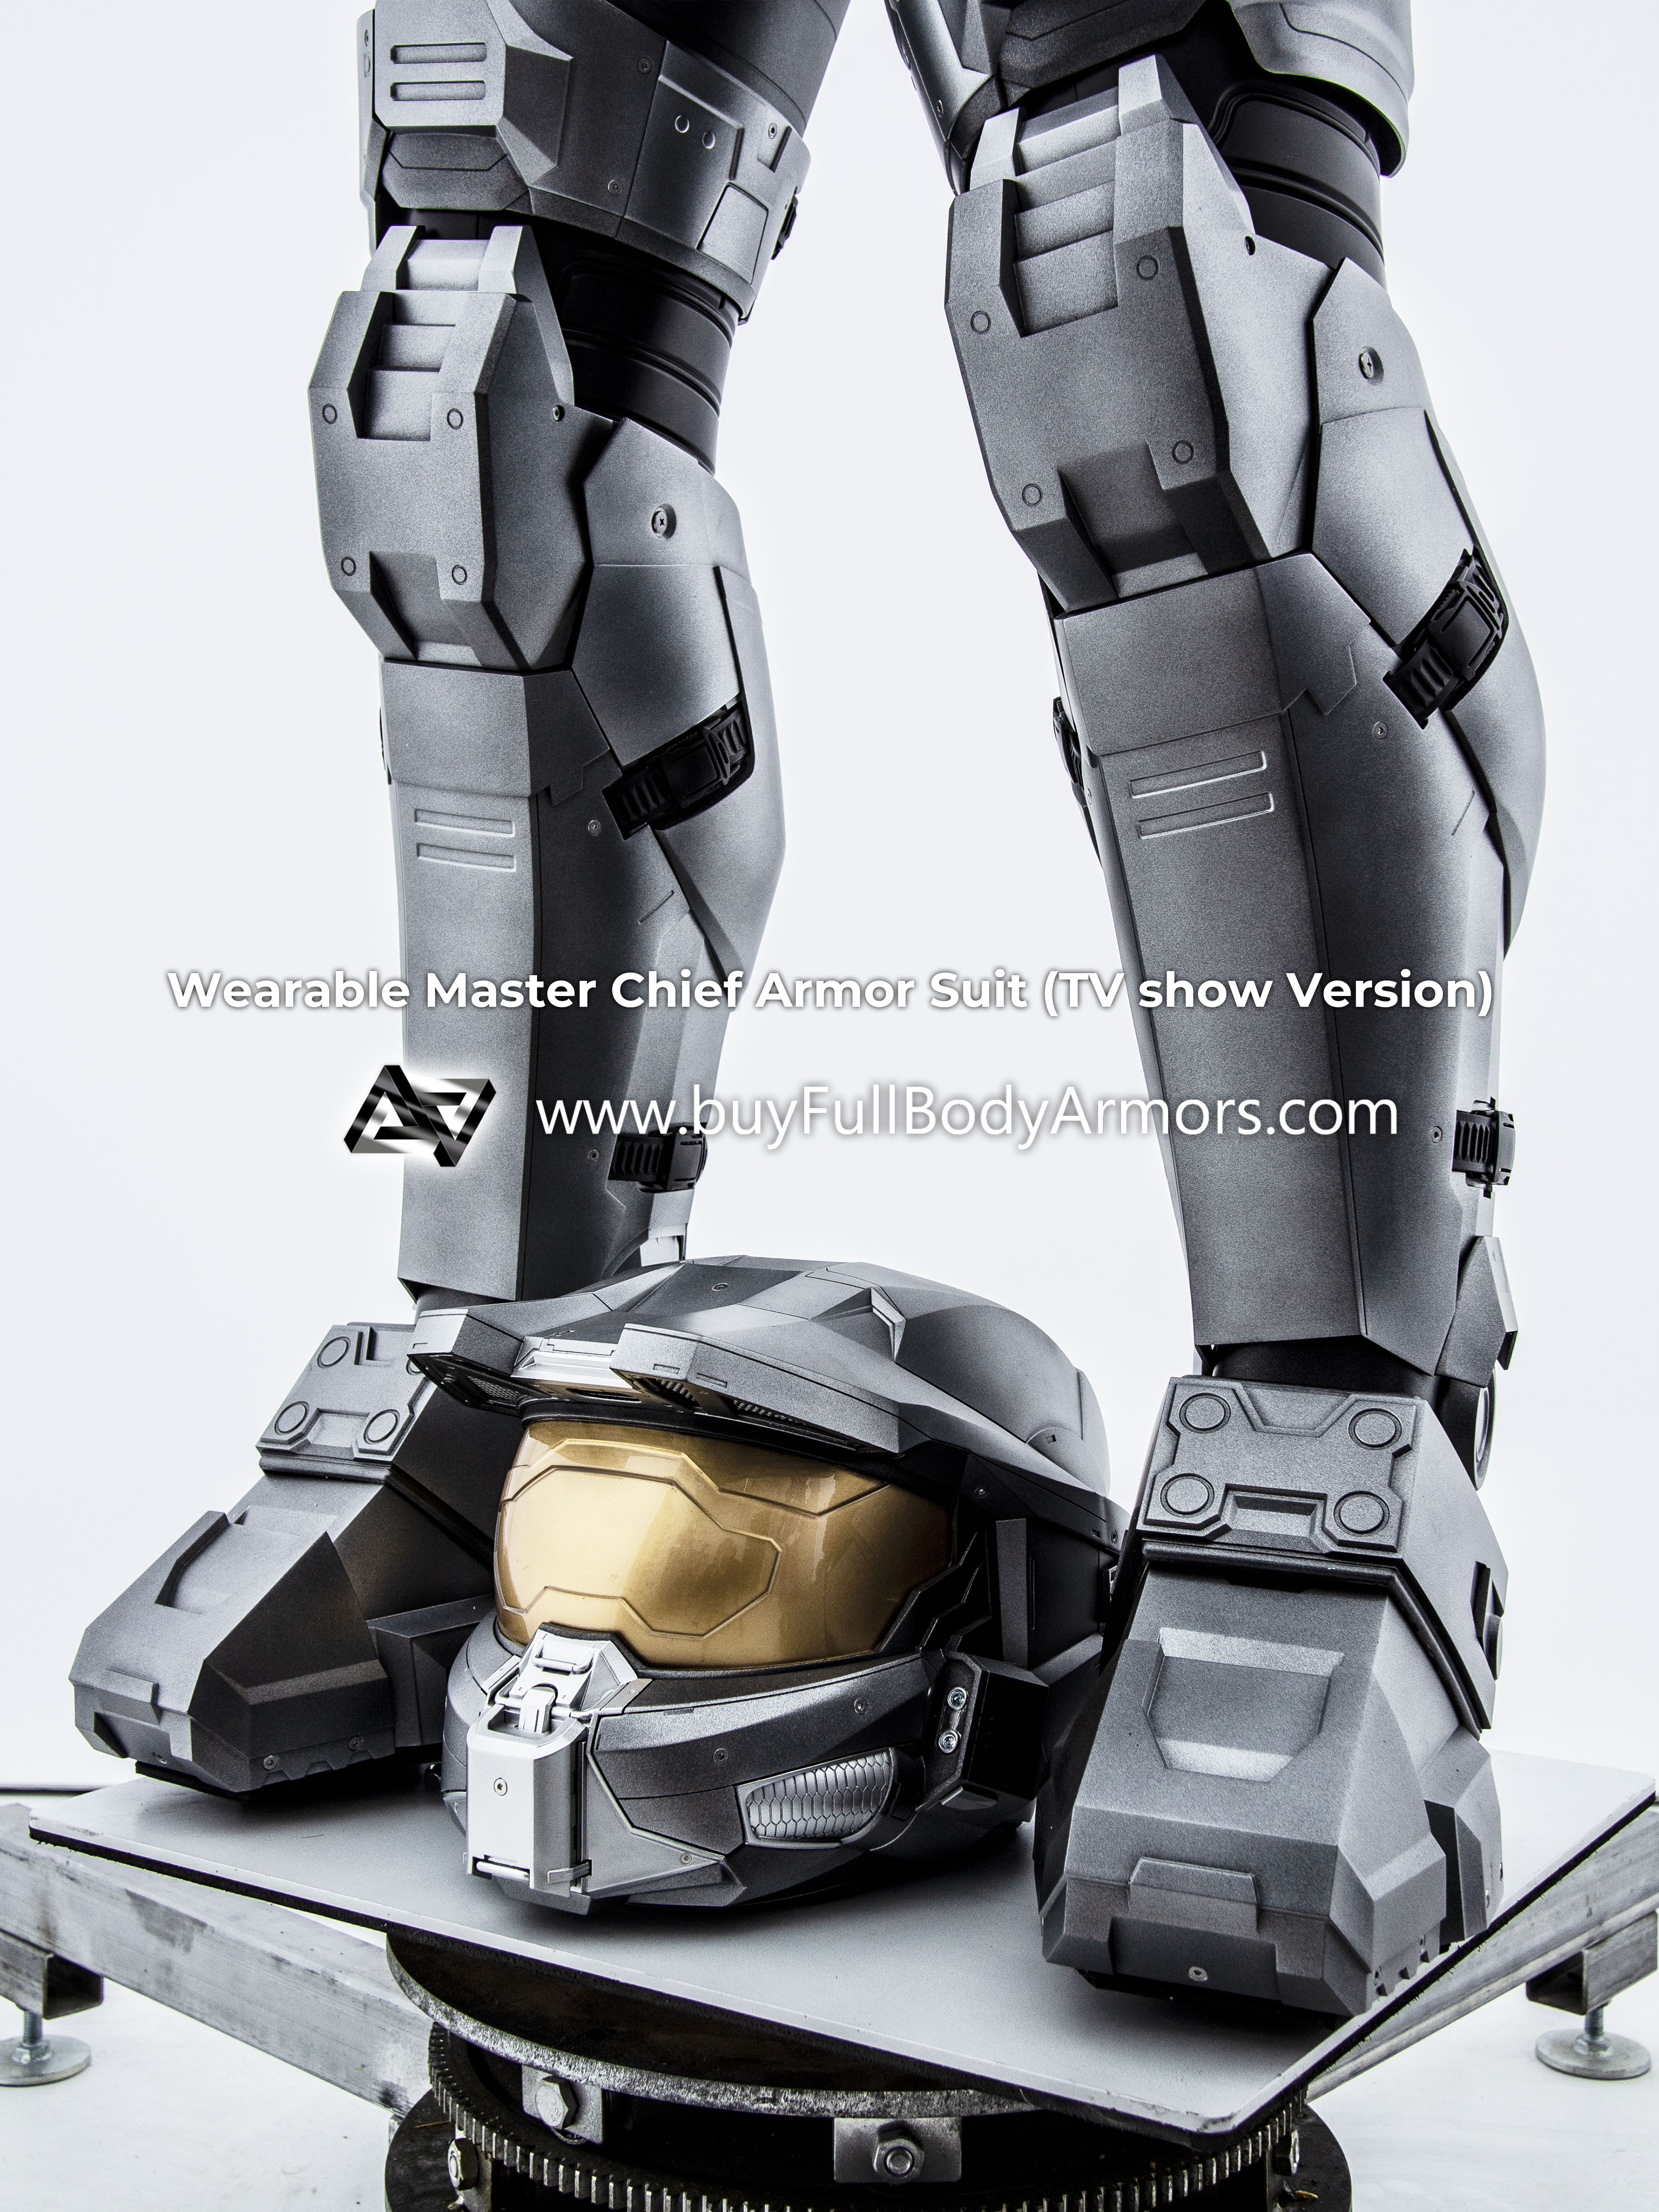 Wearable MASTER CHIEF ARMOR SUIT (Halo Infinity and Halo TV Series Season 2 Version) Unpainted13